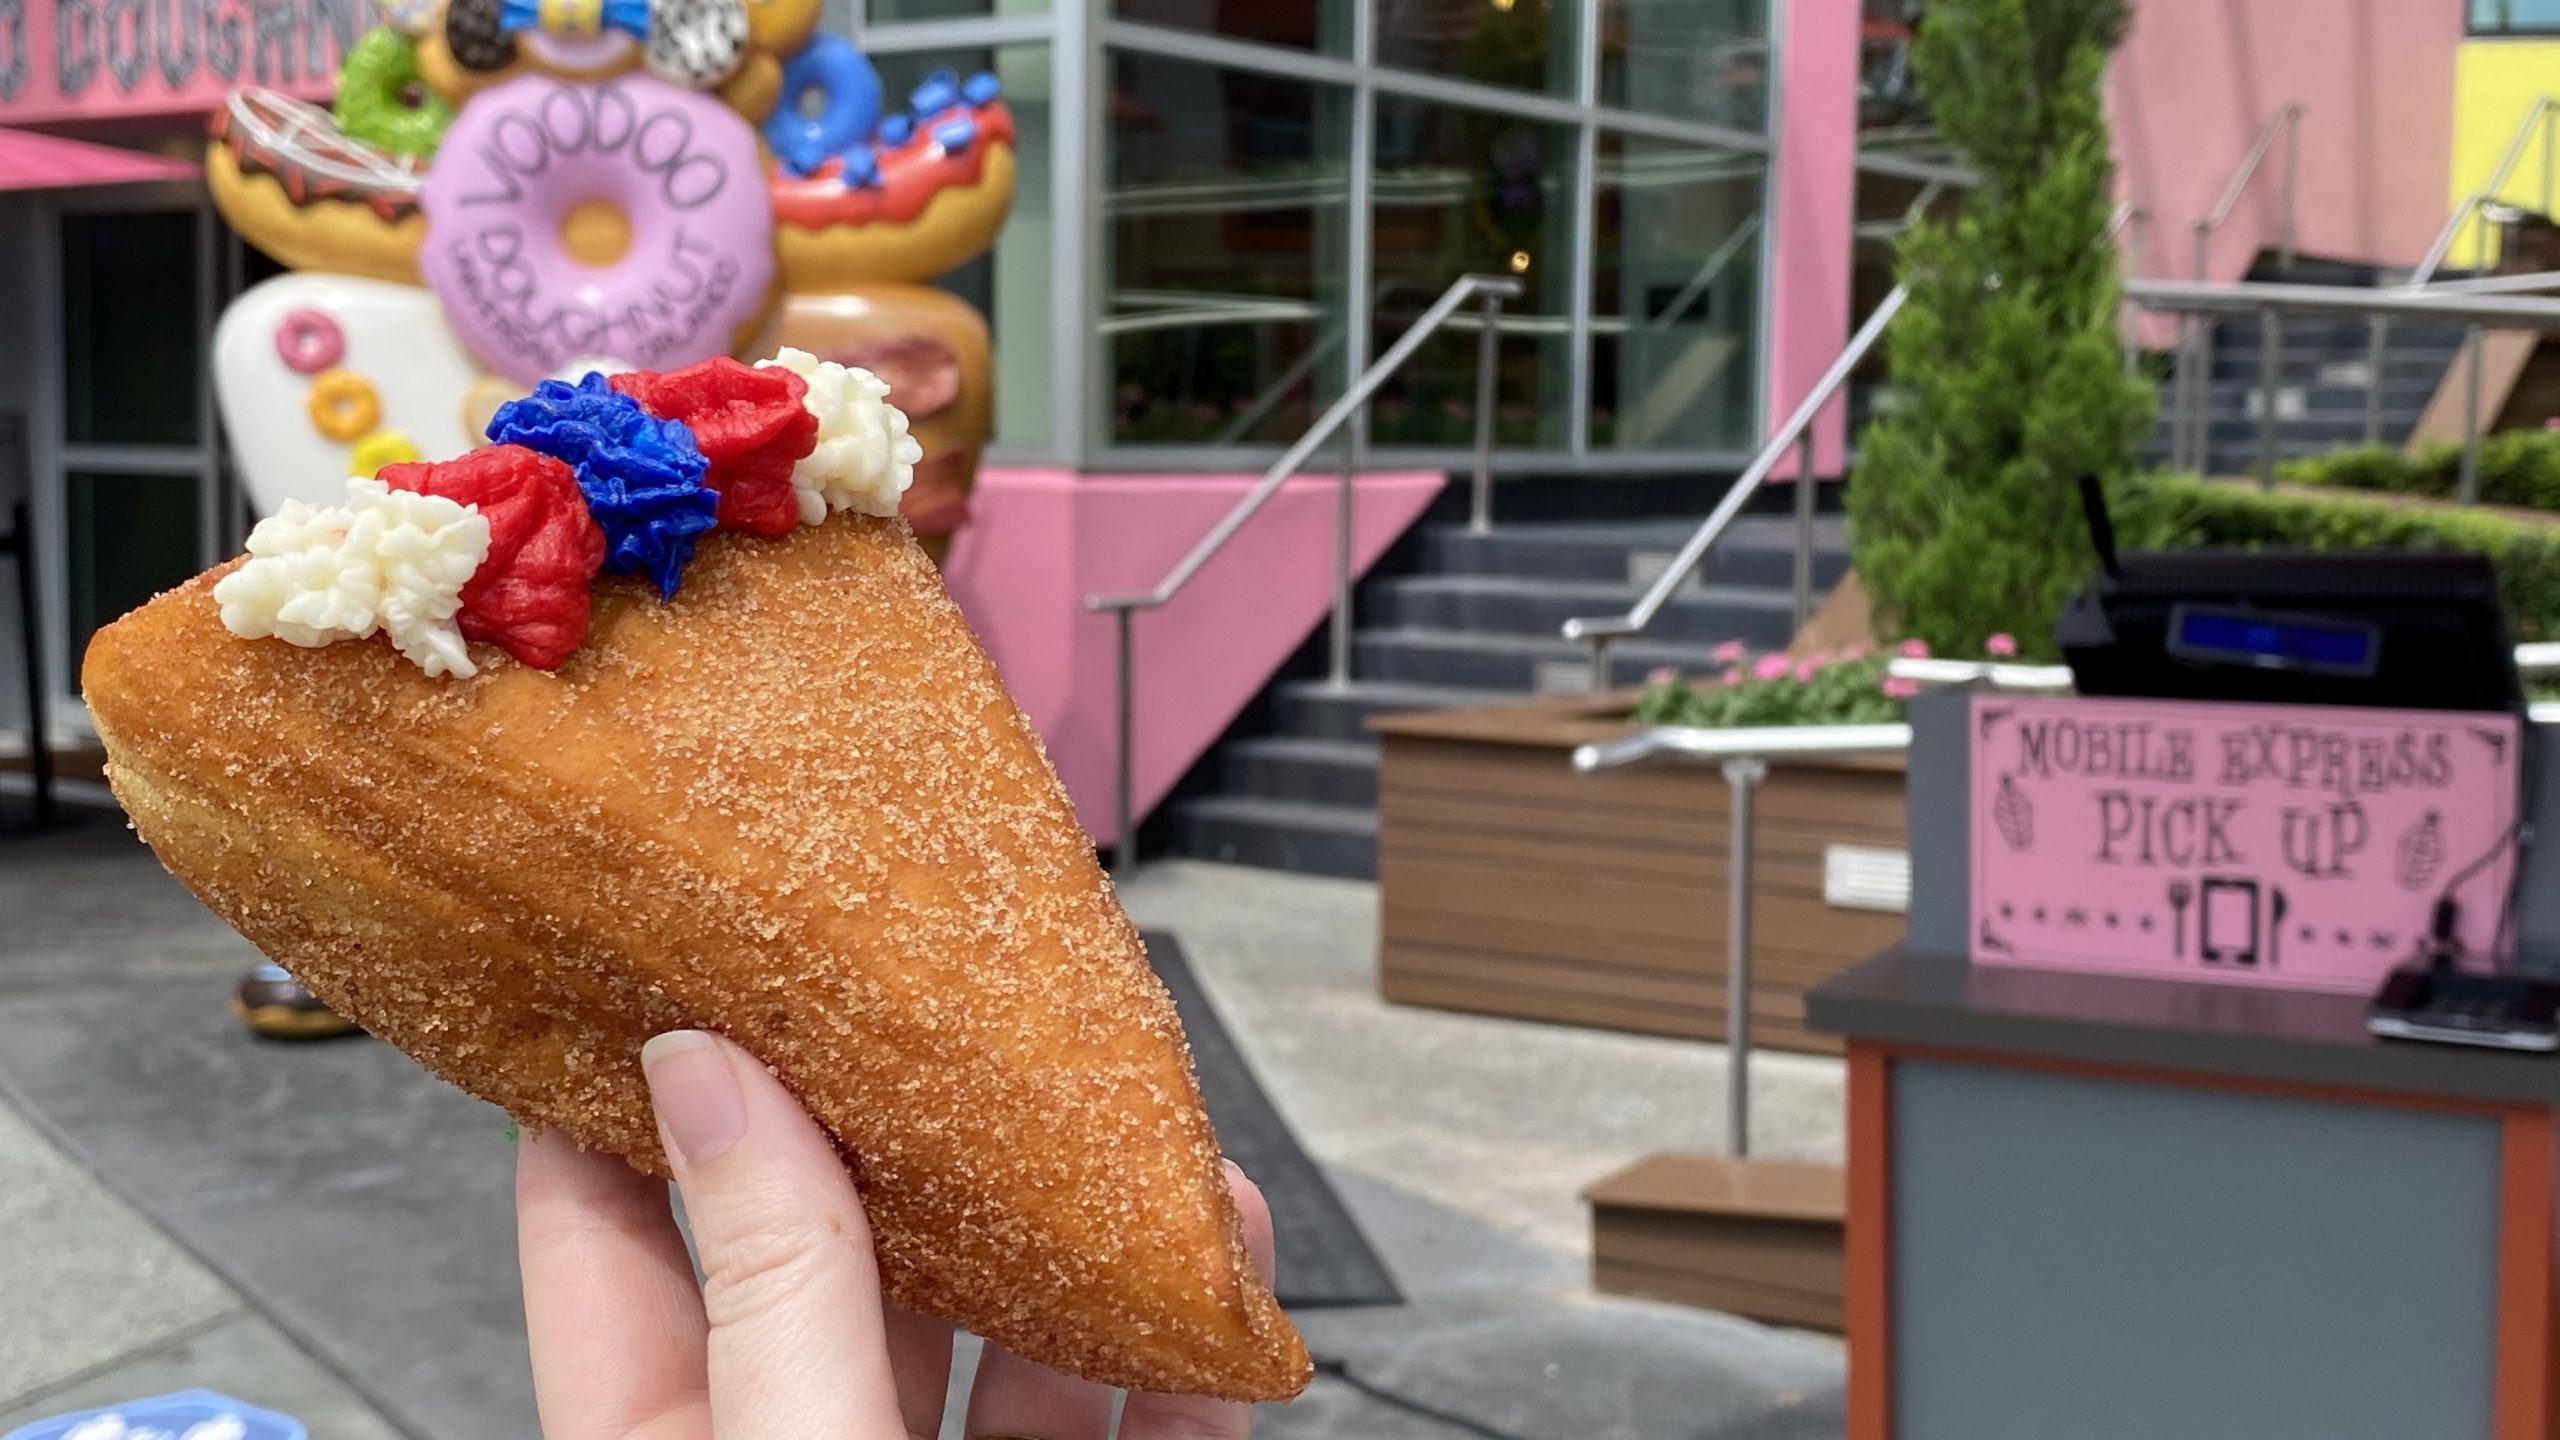 Celebrate The Fourth of July With An Apple Pie Doughnut From Voodoo Doughnut